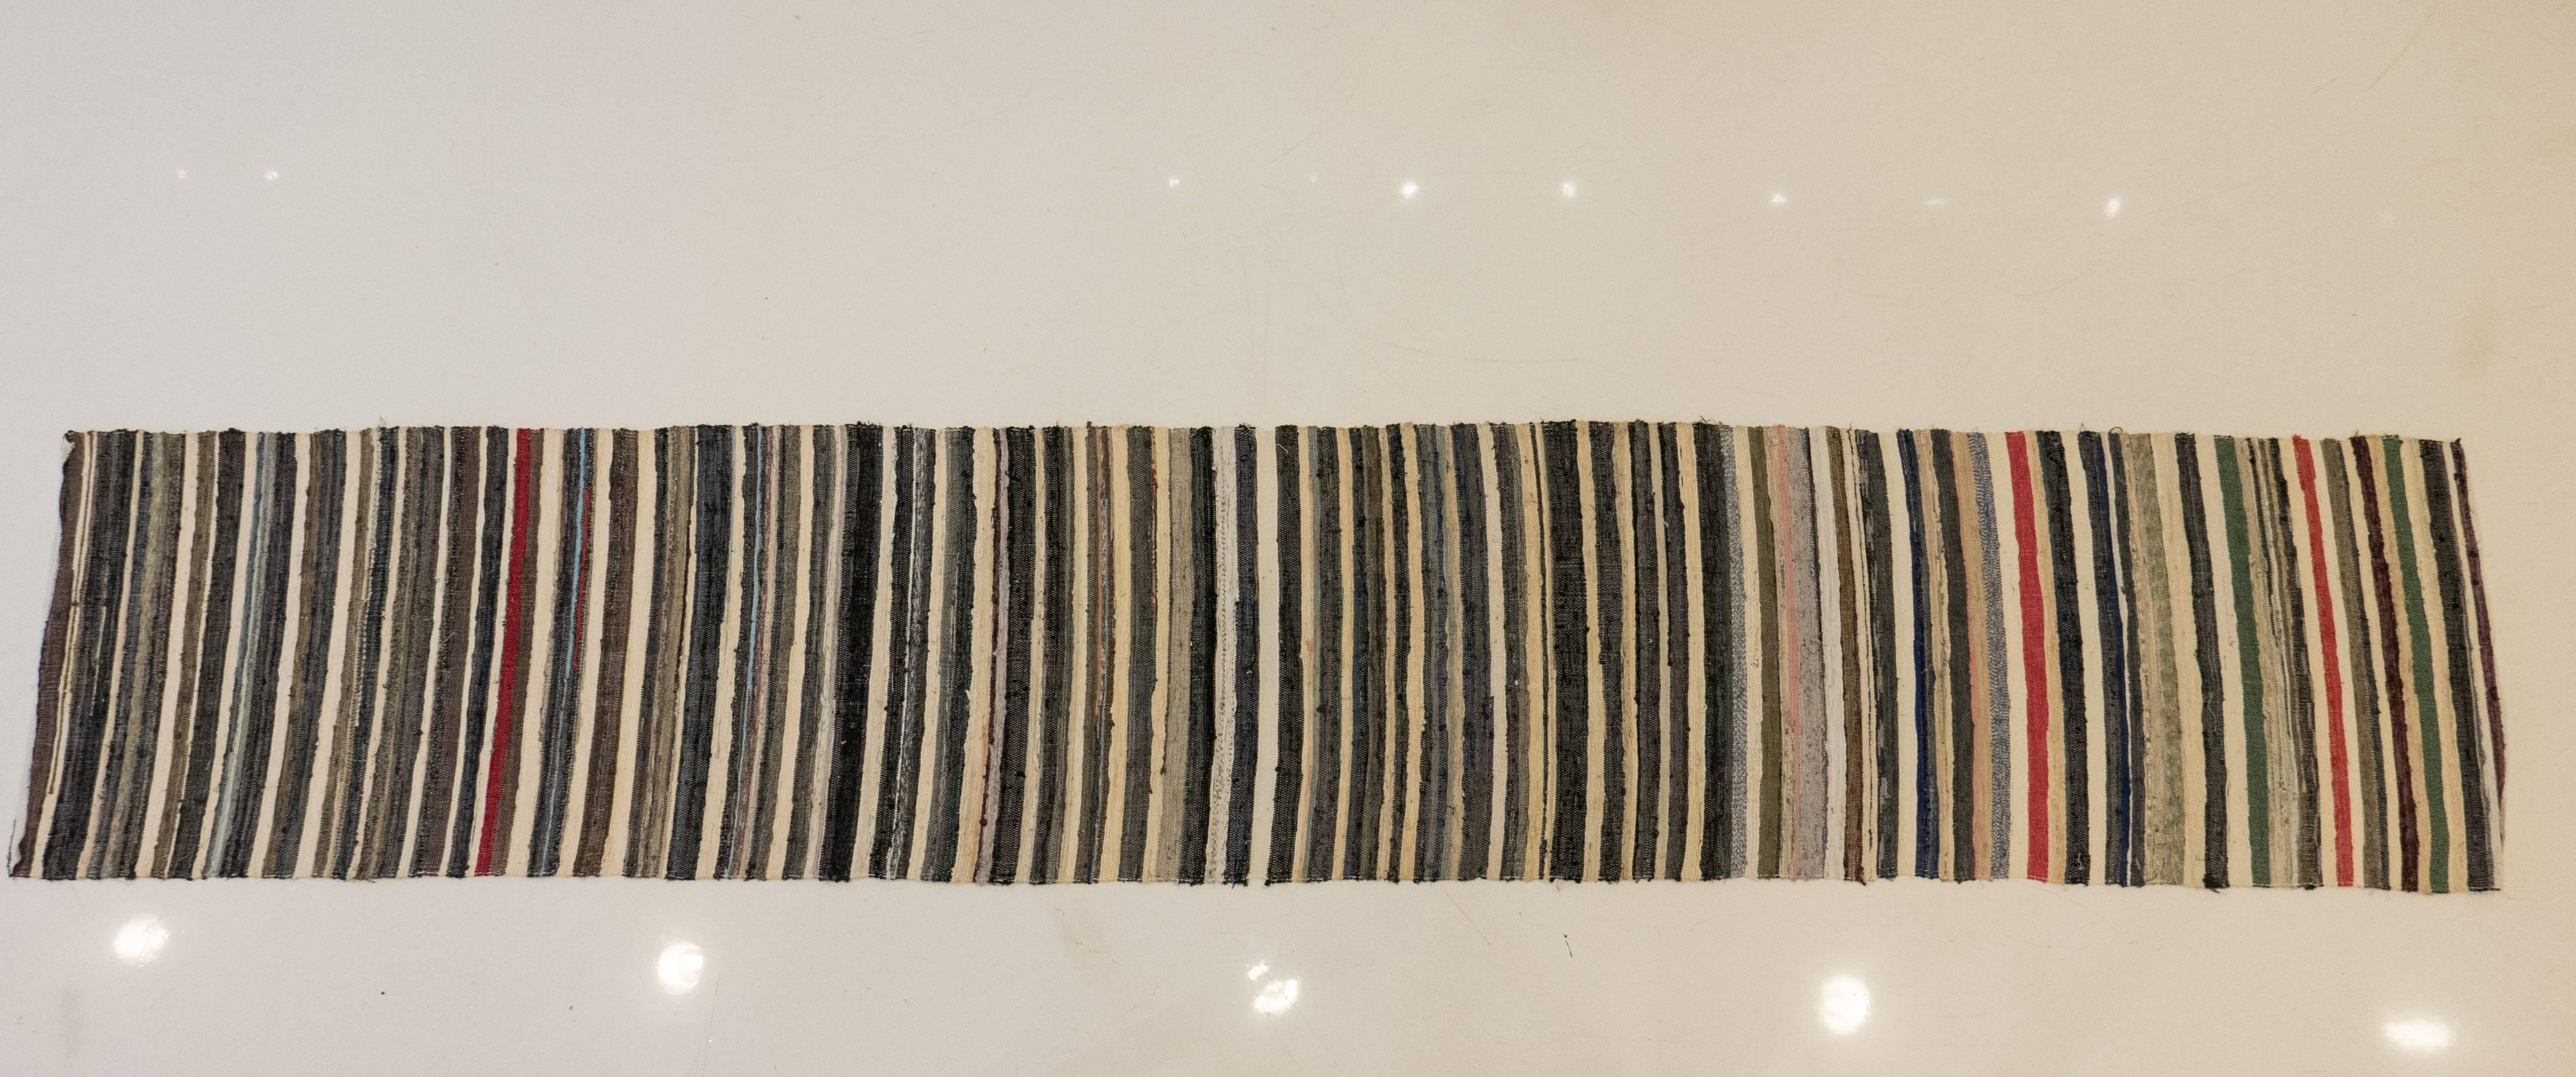 Hand-stitched fabric rag runner showing a succession of multicolor stripes, measuring 152